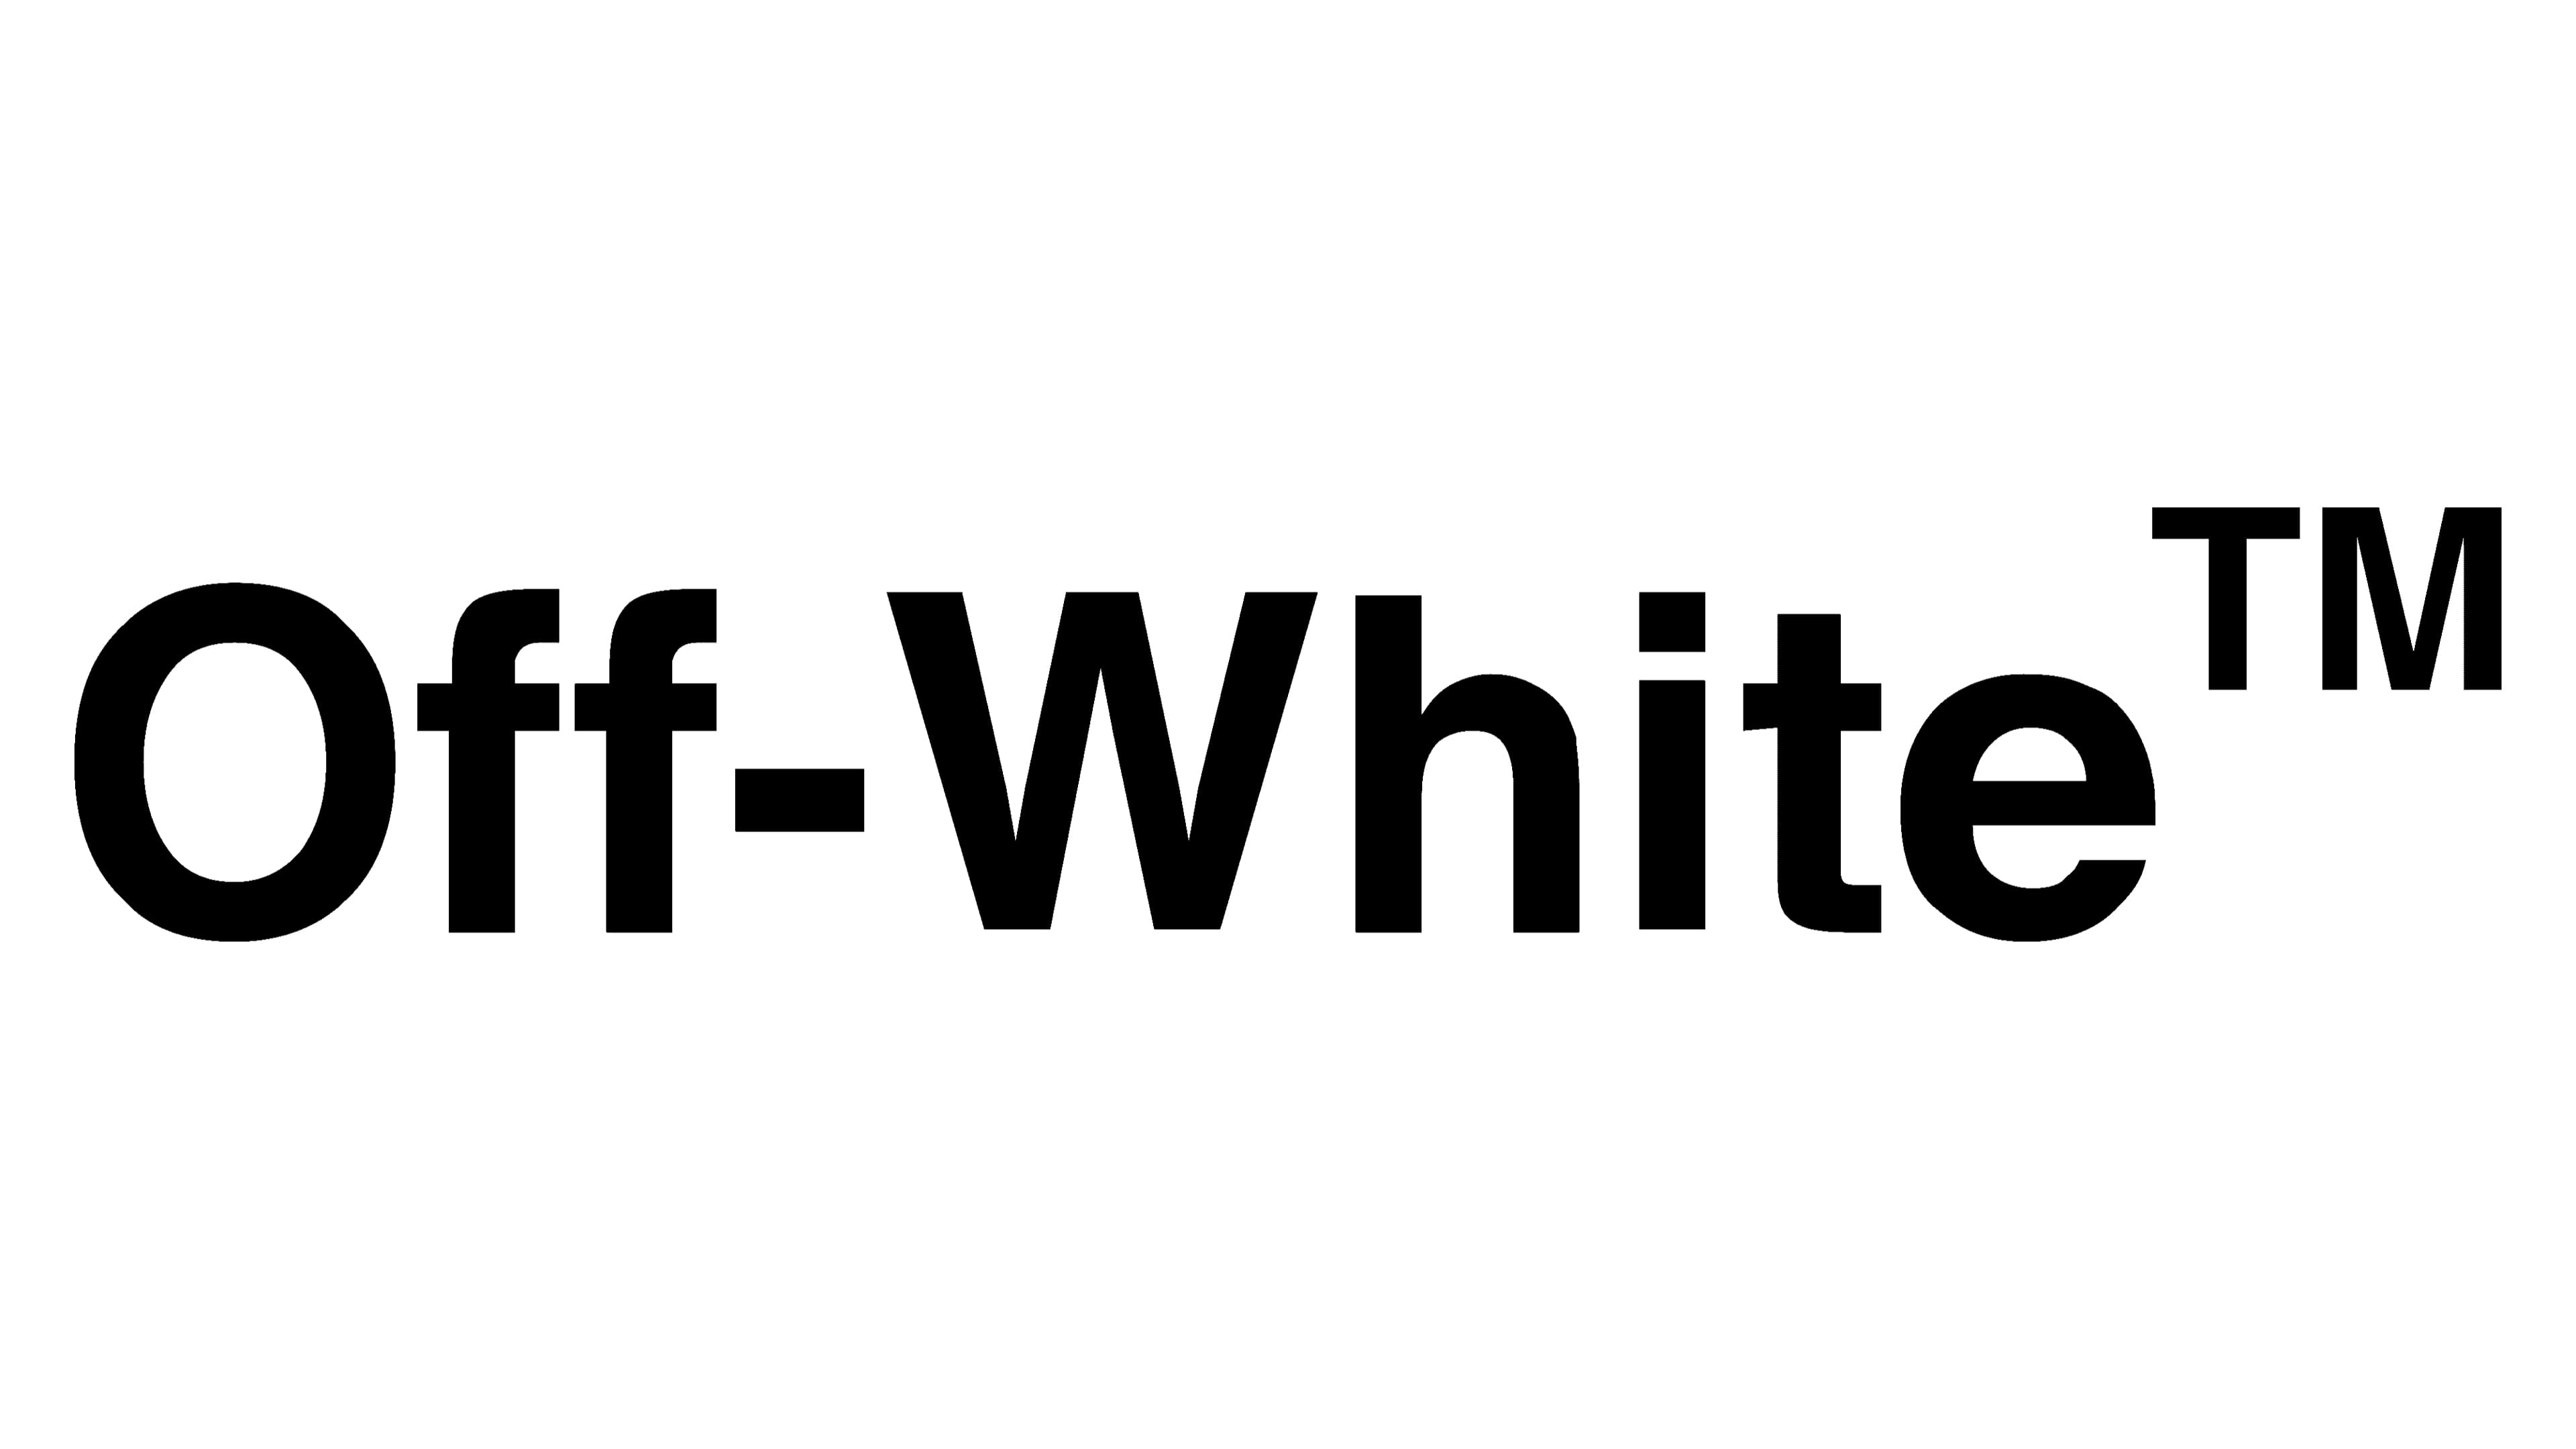 Is Off-White updating its logo?